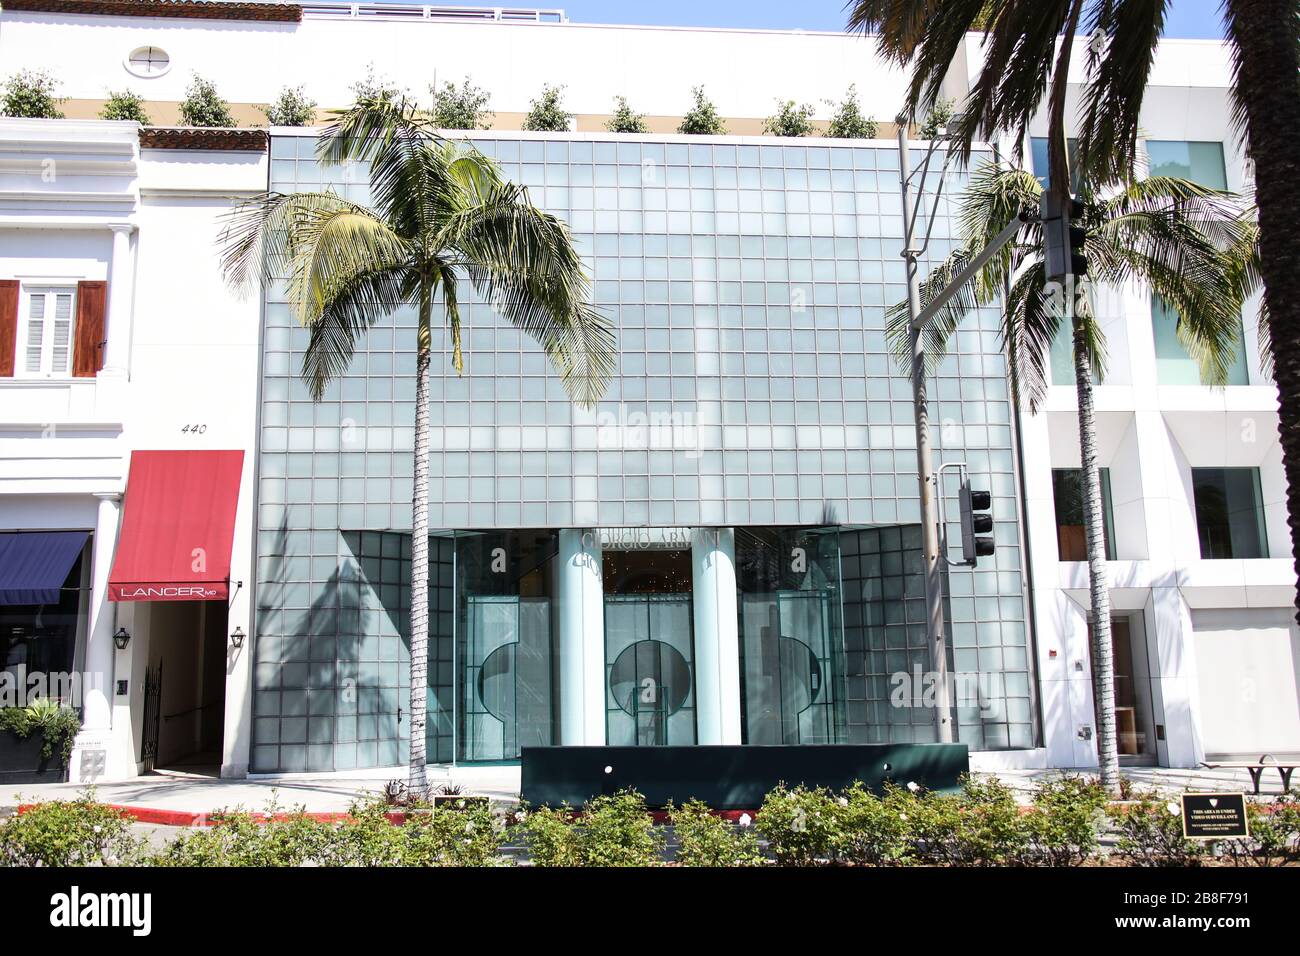 BEVERLY HILLS, LOS ANGELES, CALIFORNIA, USA - MARCH 21: Giorgio Armani  Beverly Hills Rodeo Drive store, temporarily closed due to the coronavirus,  two days after the 'Safer at Home' order issued by